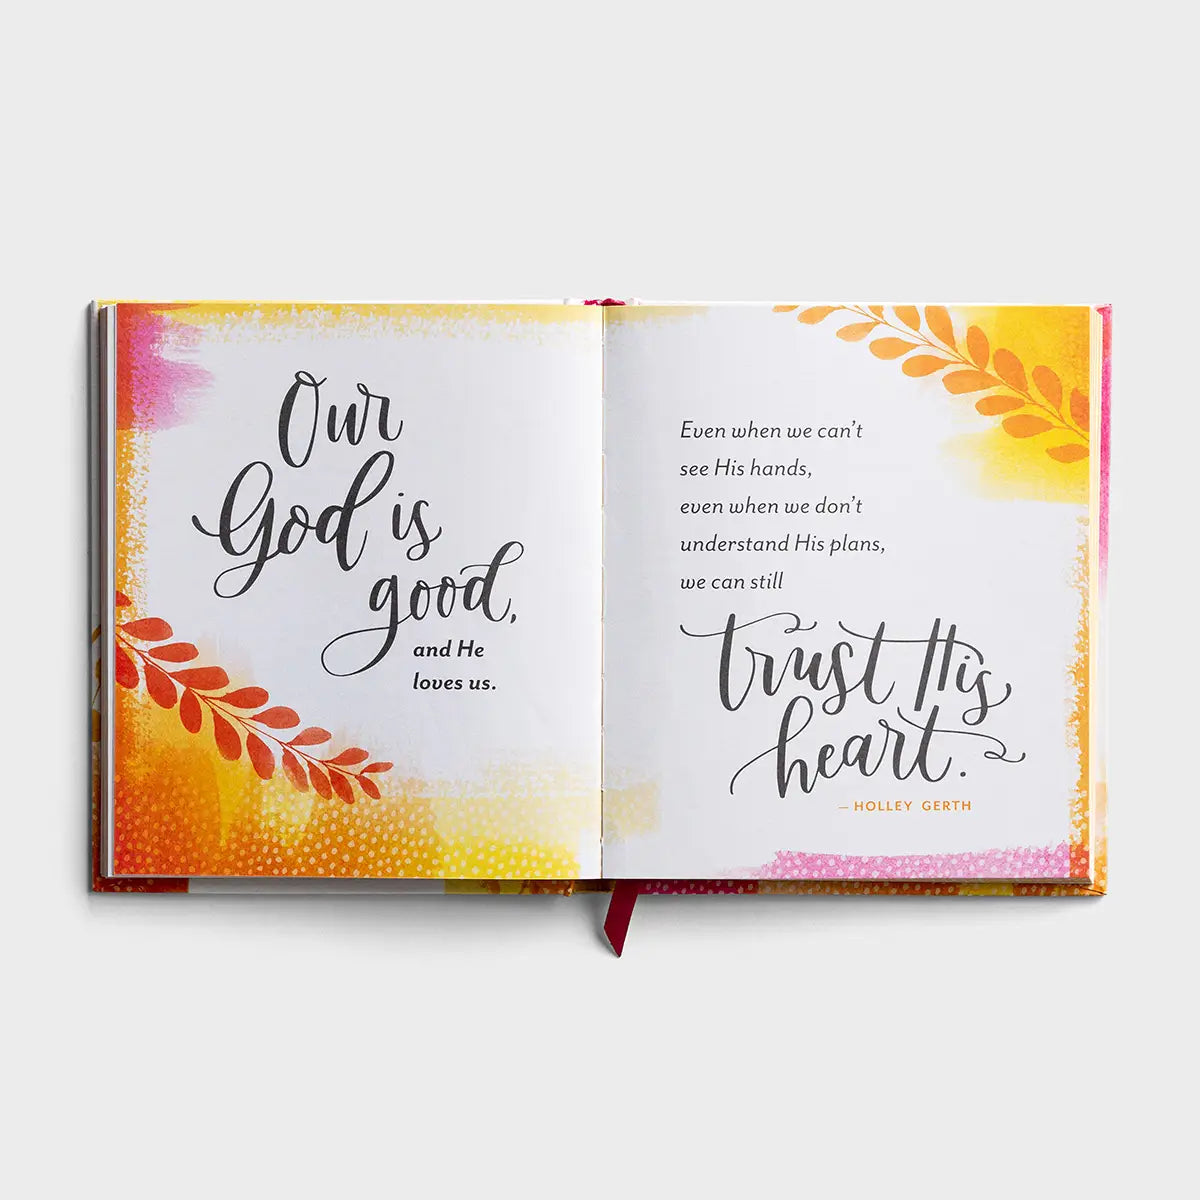 Holley Gerth - Promises from God for Life's Hard Moments - Gift Book